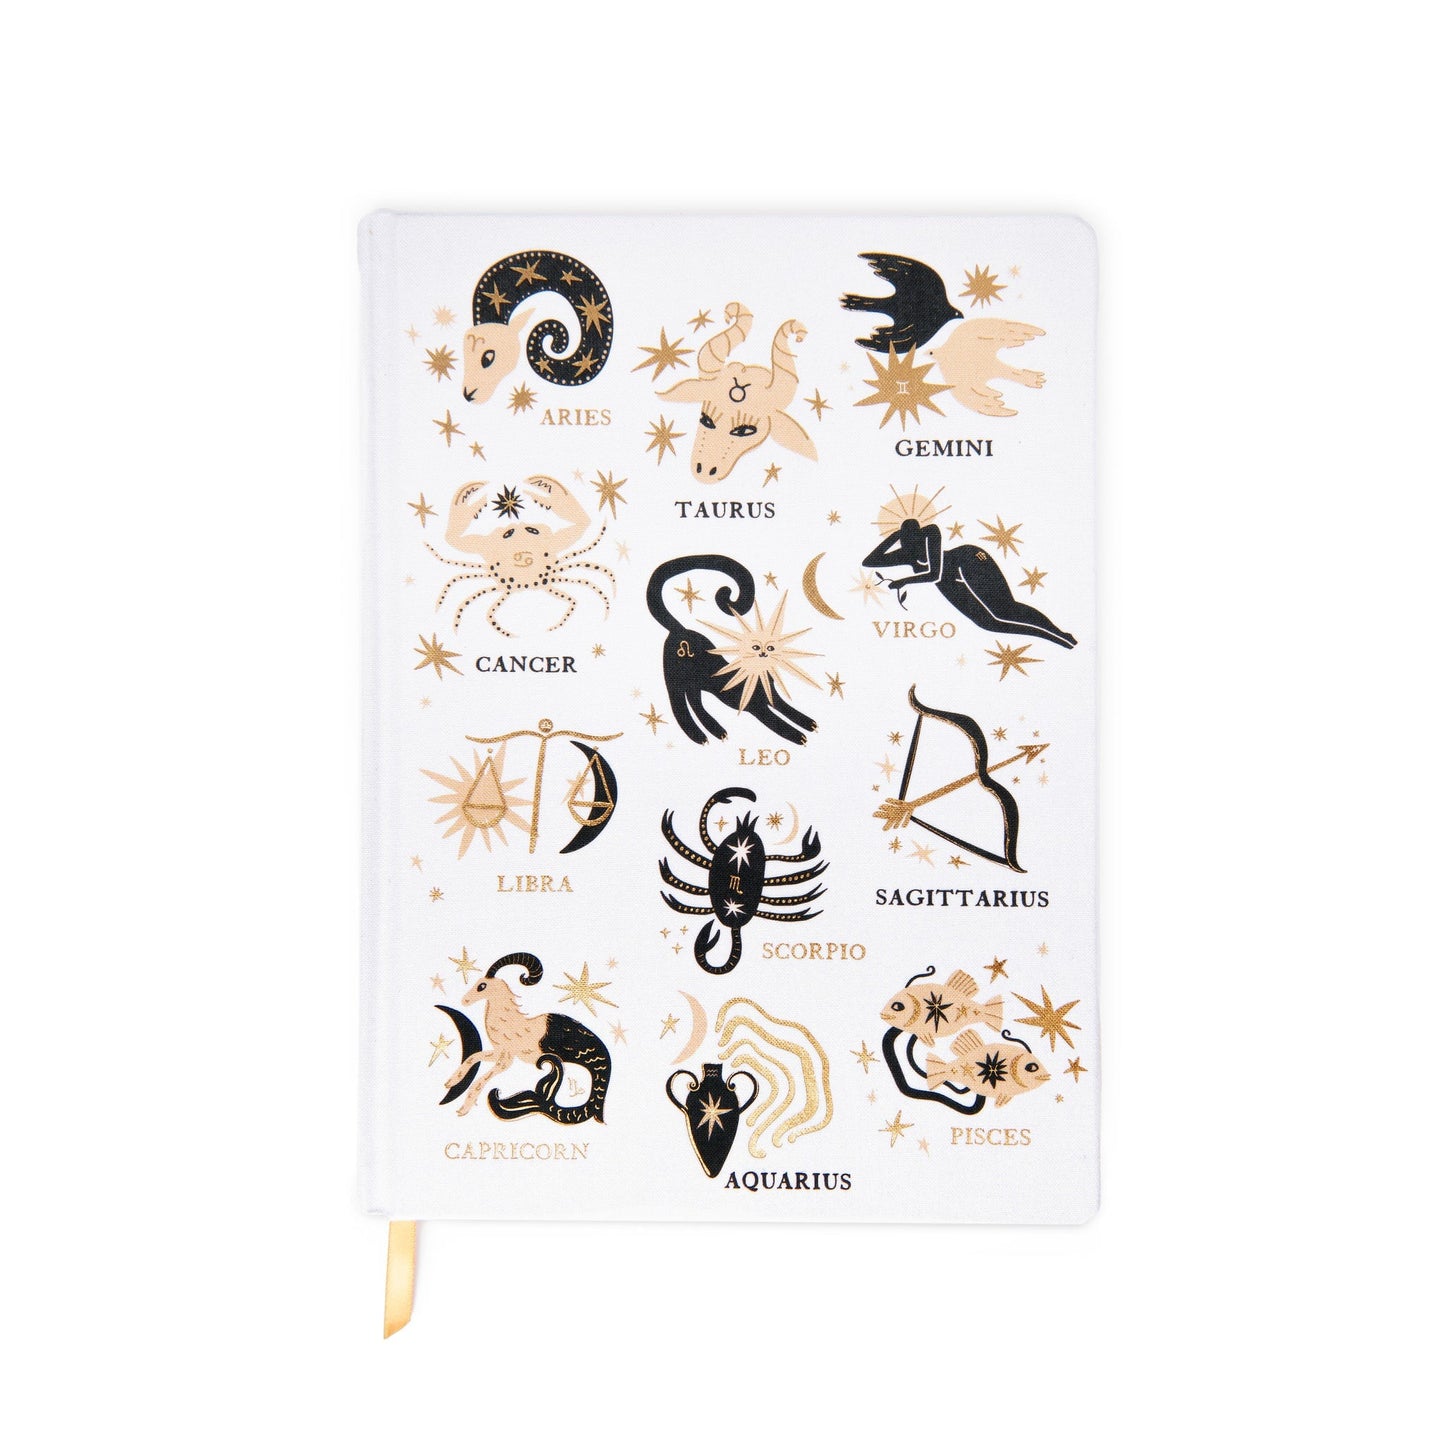 Bookcloth covered jumbo journal with Zodiac symbols on cover, white background